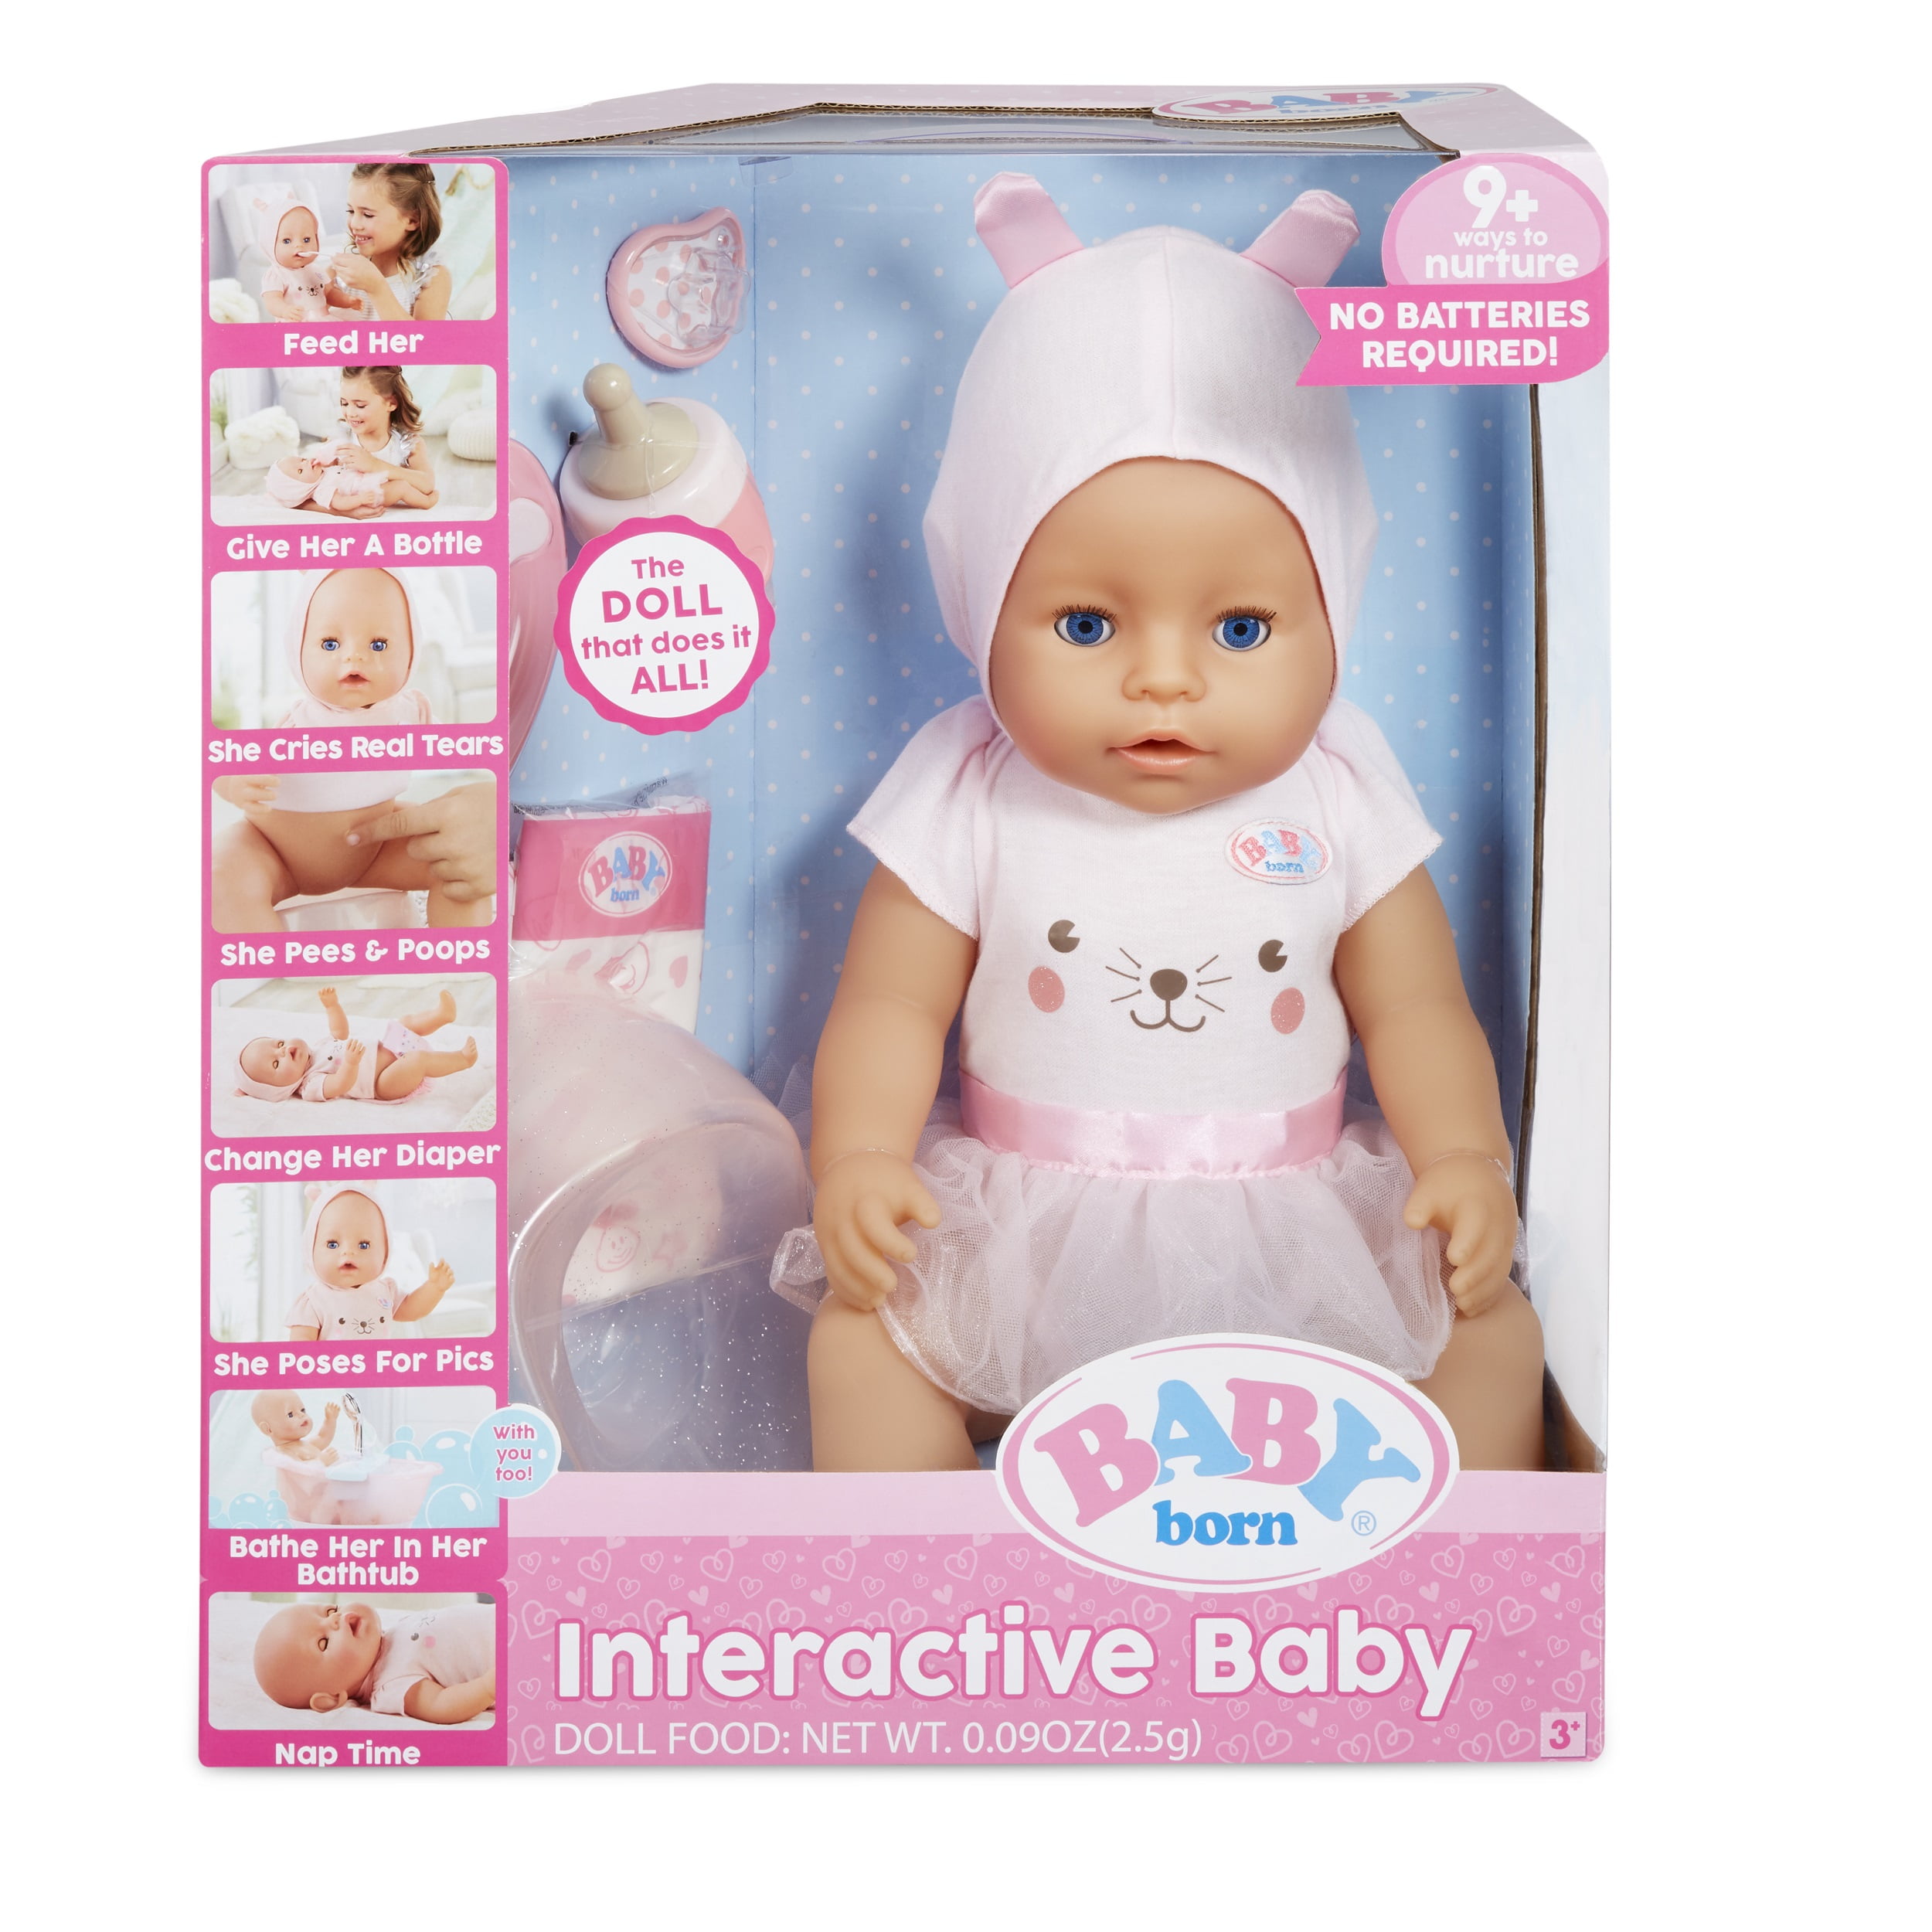 Brown Eyes with 9 Ways to Nurture Baby Born Interactive Boy Baby Doll Party Theme